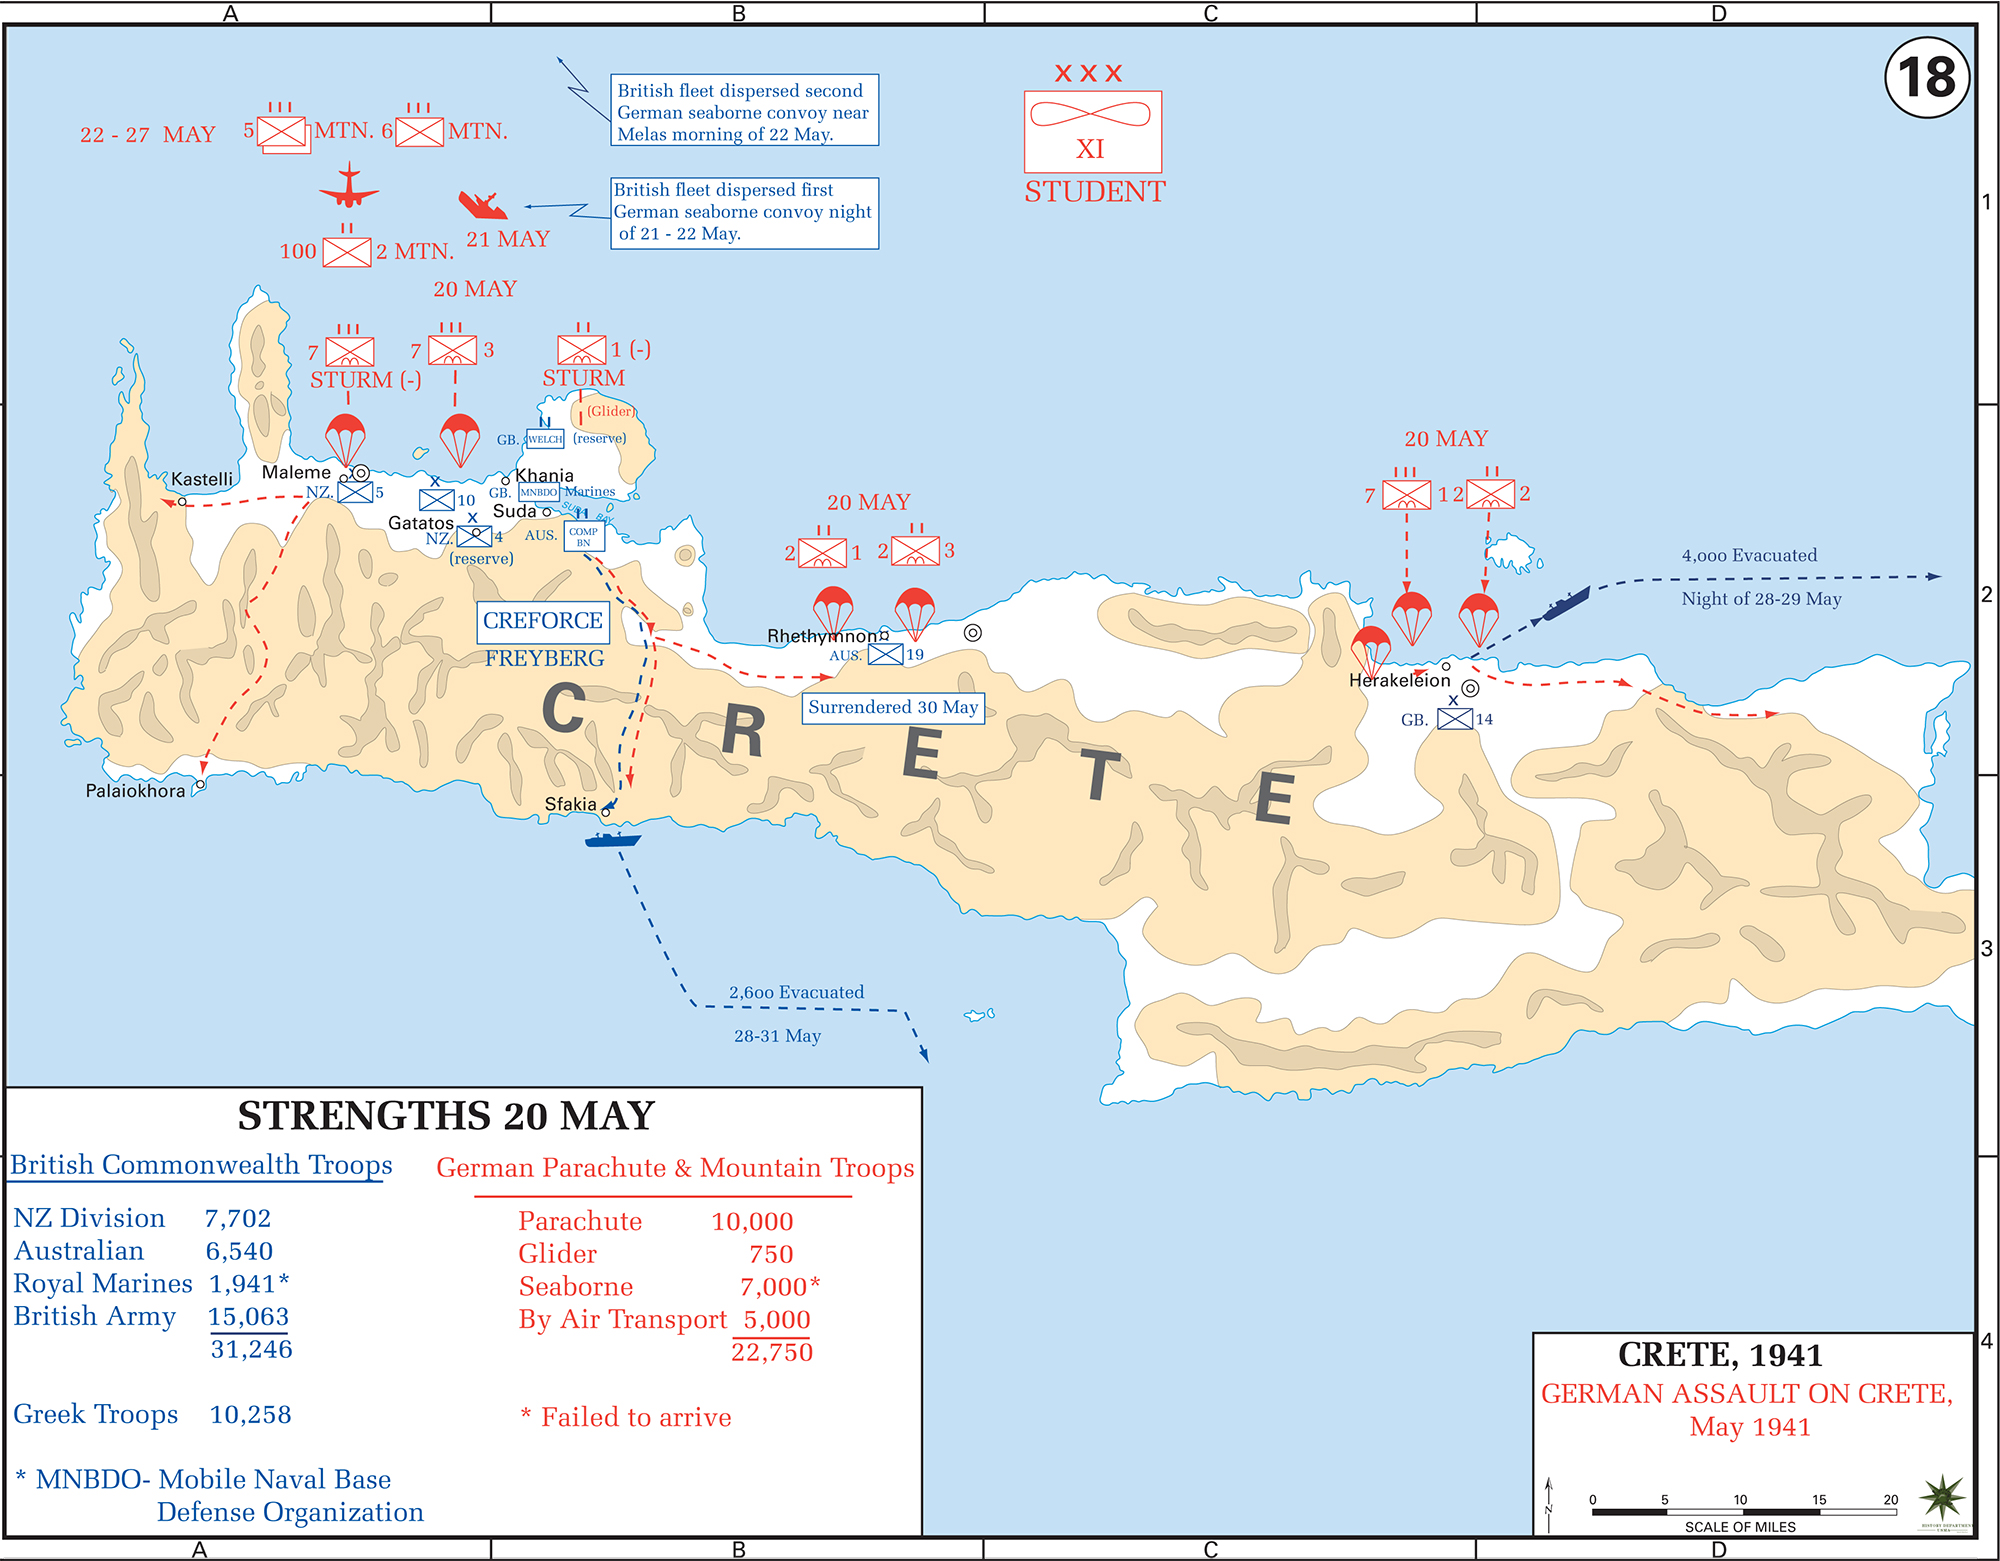 History Map of WWII: German Assault on Crete, May 1941